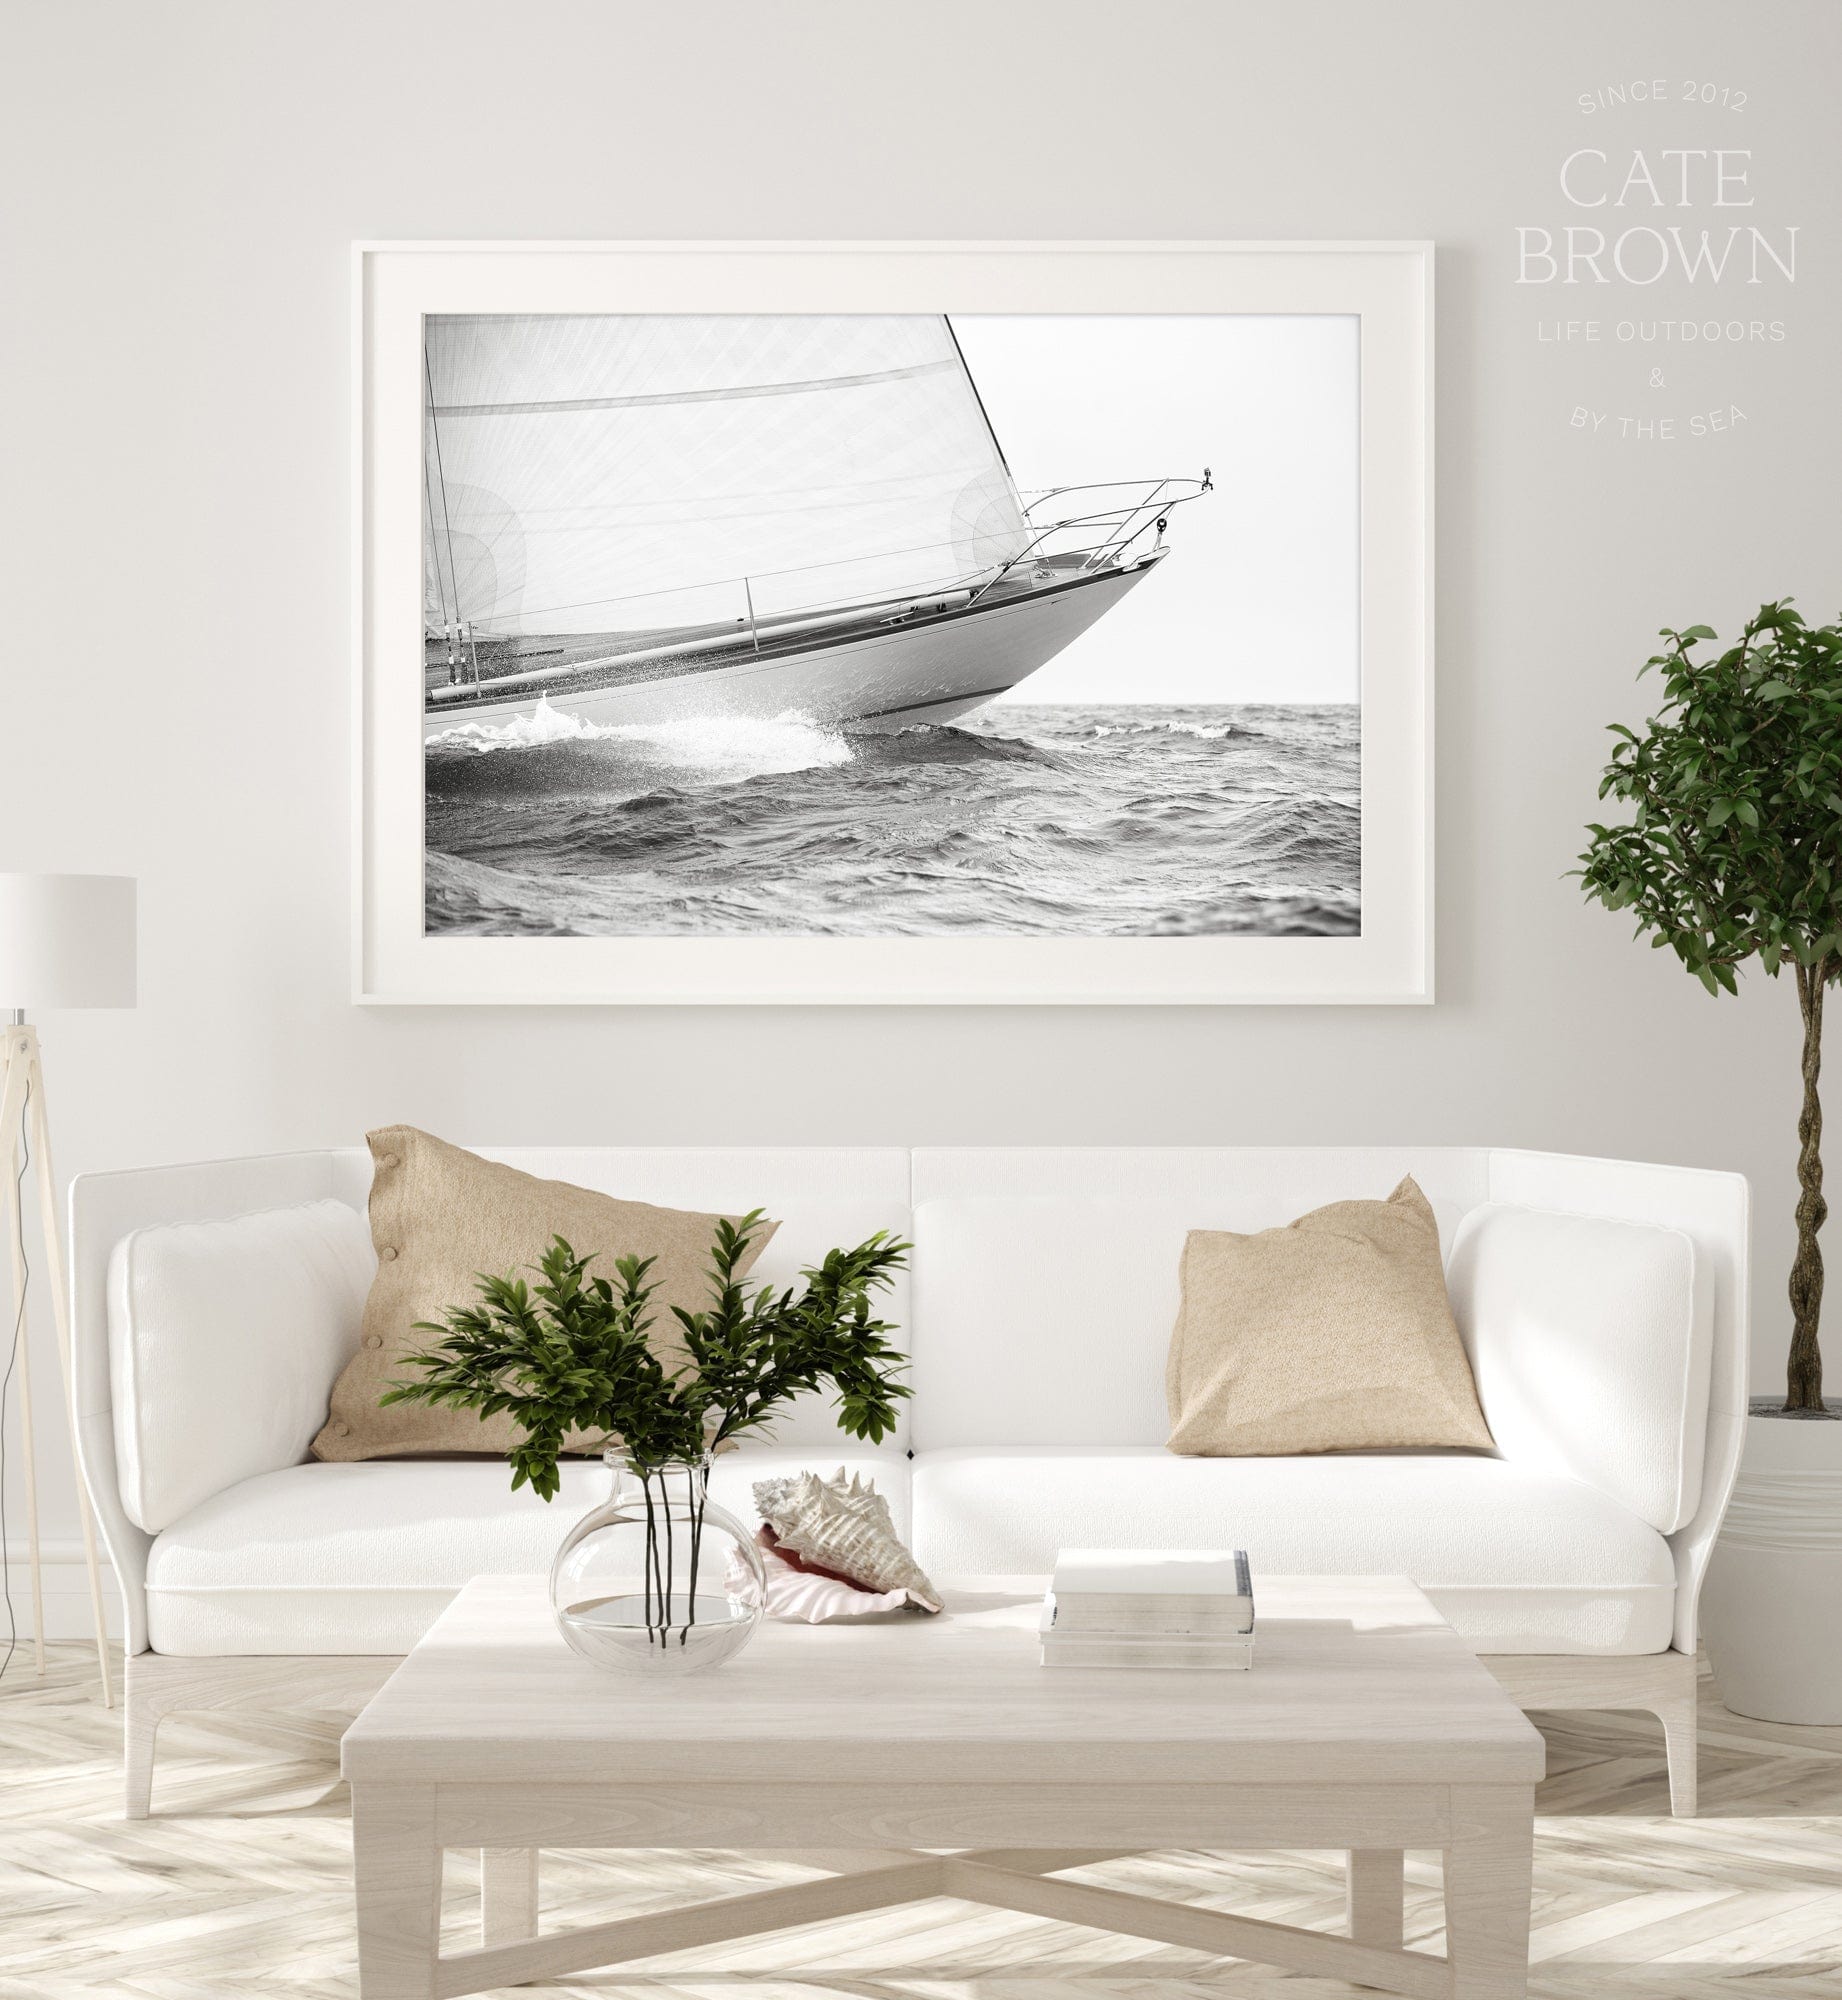 Cate Brown Photo Fine Art Print / 8"x12" / None (Print Only) Equus Bow in Silver  //  Nautical Photography Made to Order Ocean Fine Art